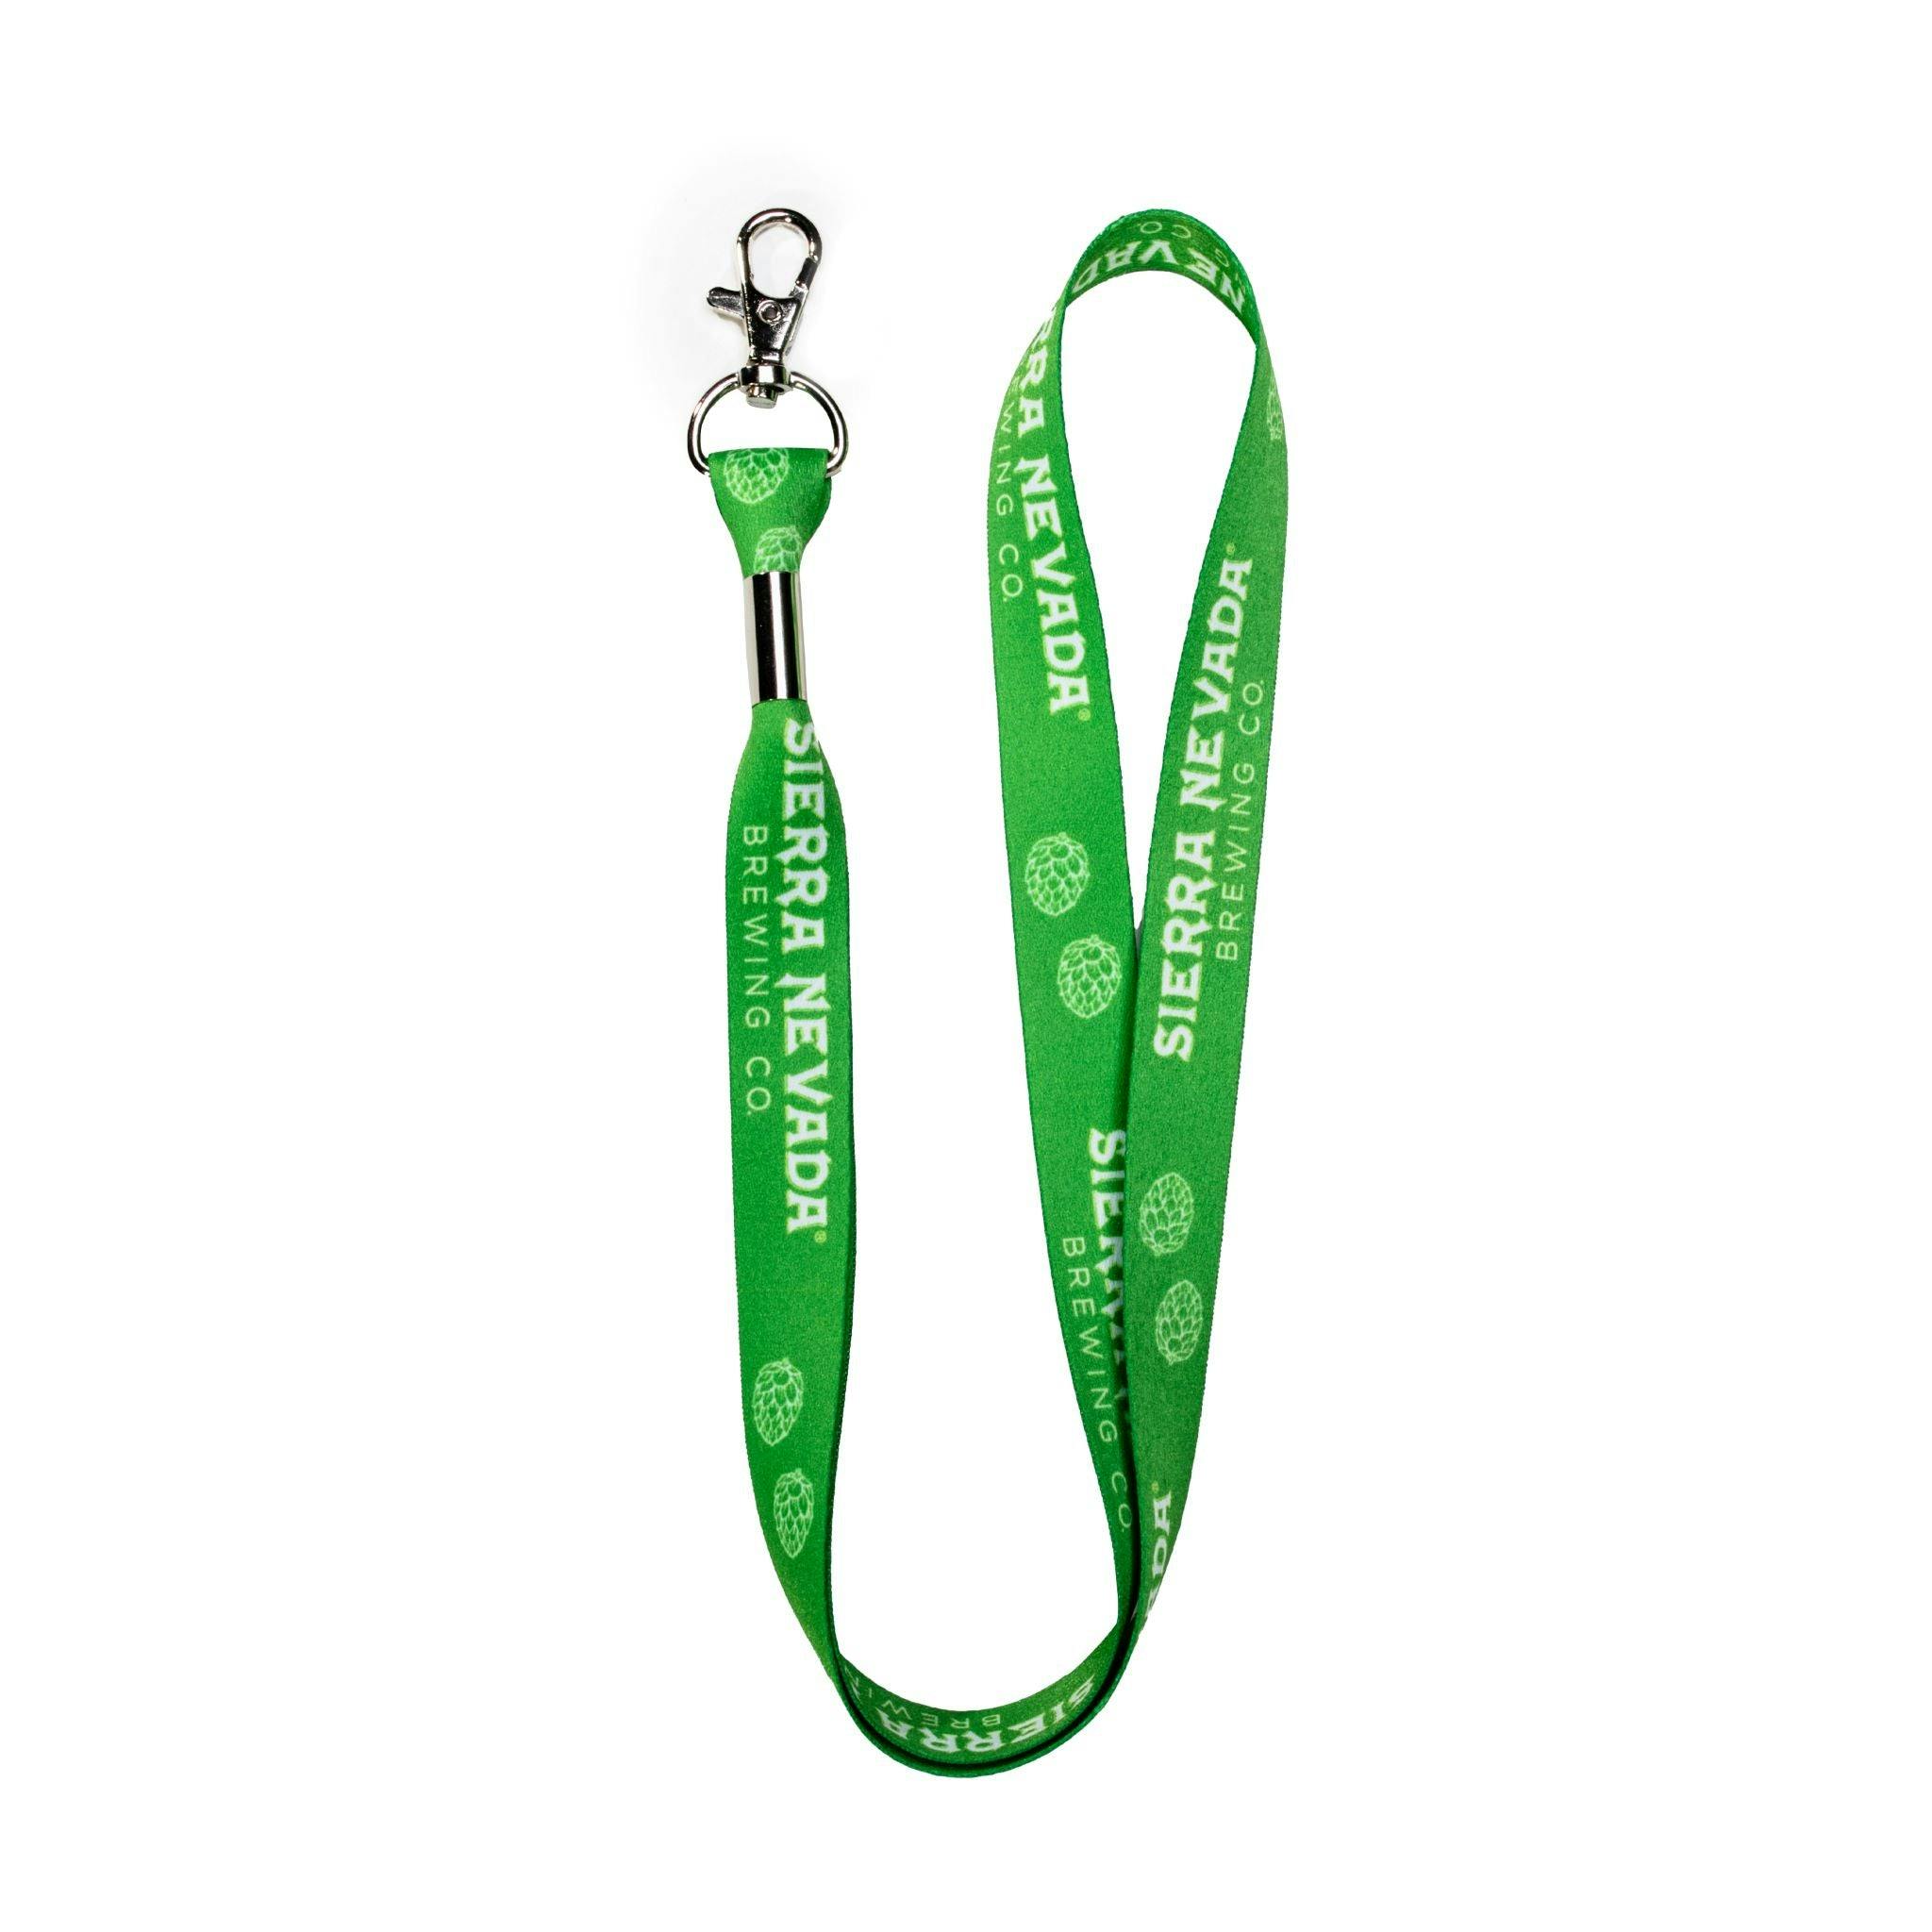 Sierra Nevada Brewing Co. green lanyard - full view showing the clip at the end